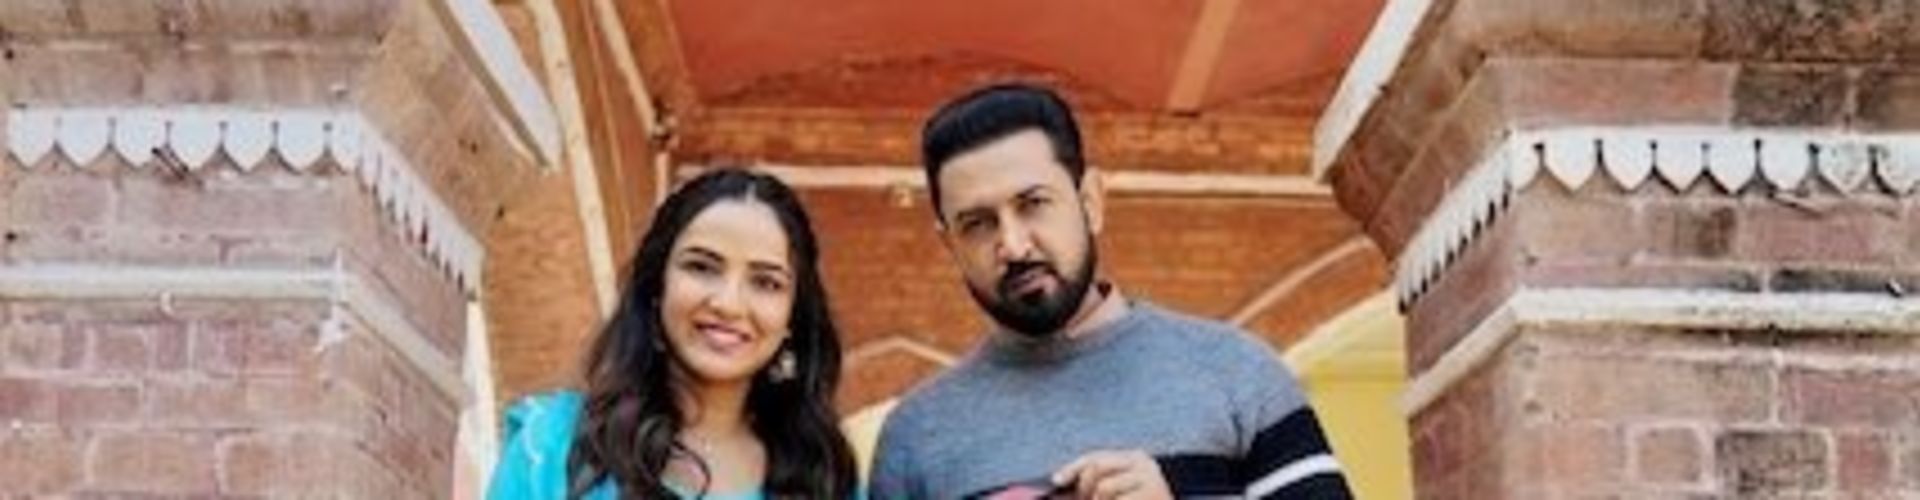 Warning 2 Gets A Release Date, Starring Gippy Grewal And Jasmin Bhasin